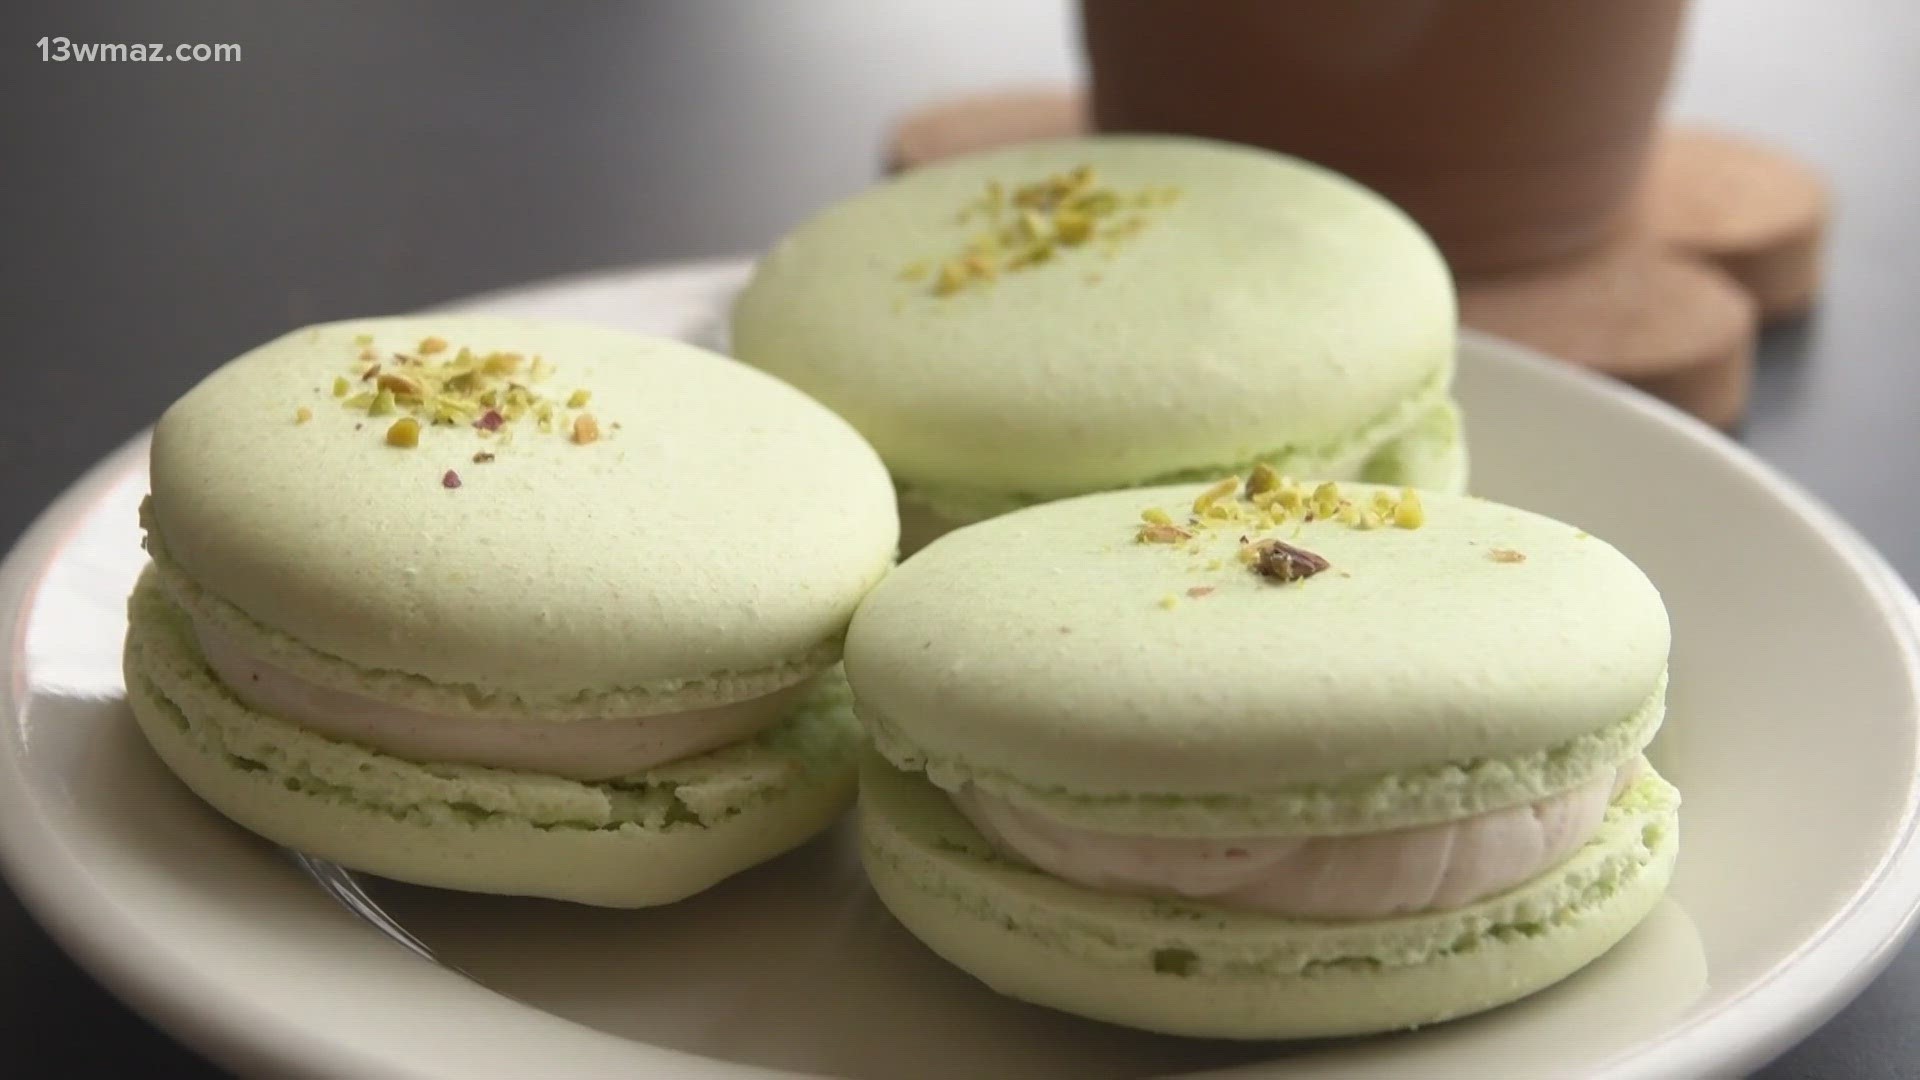 They are entering their Pistachio flavored Italian macarons with brown butter buttercream and a white chocolate ganache center.